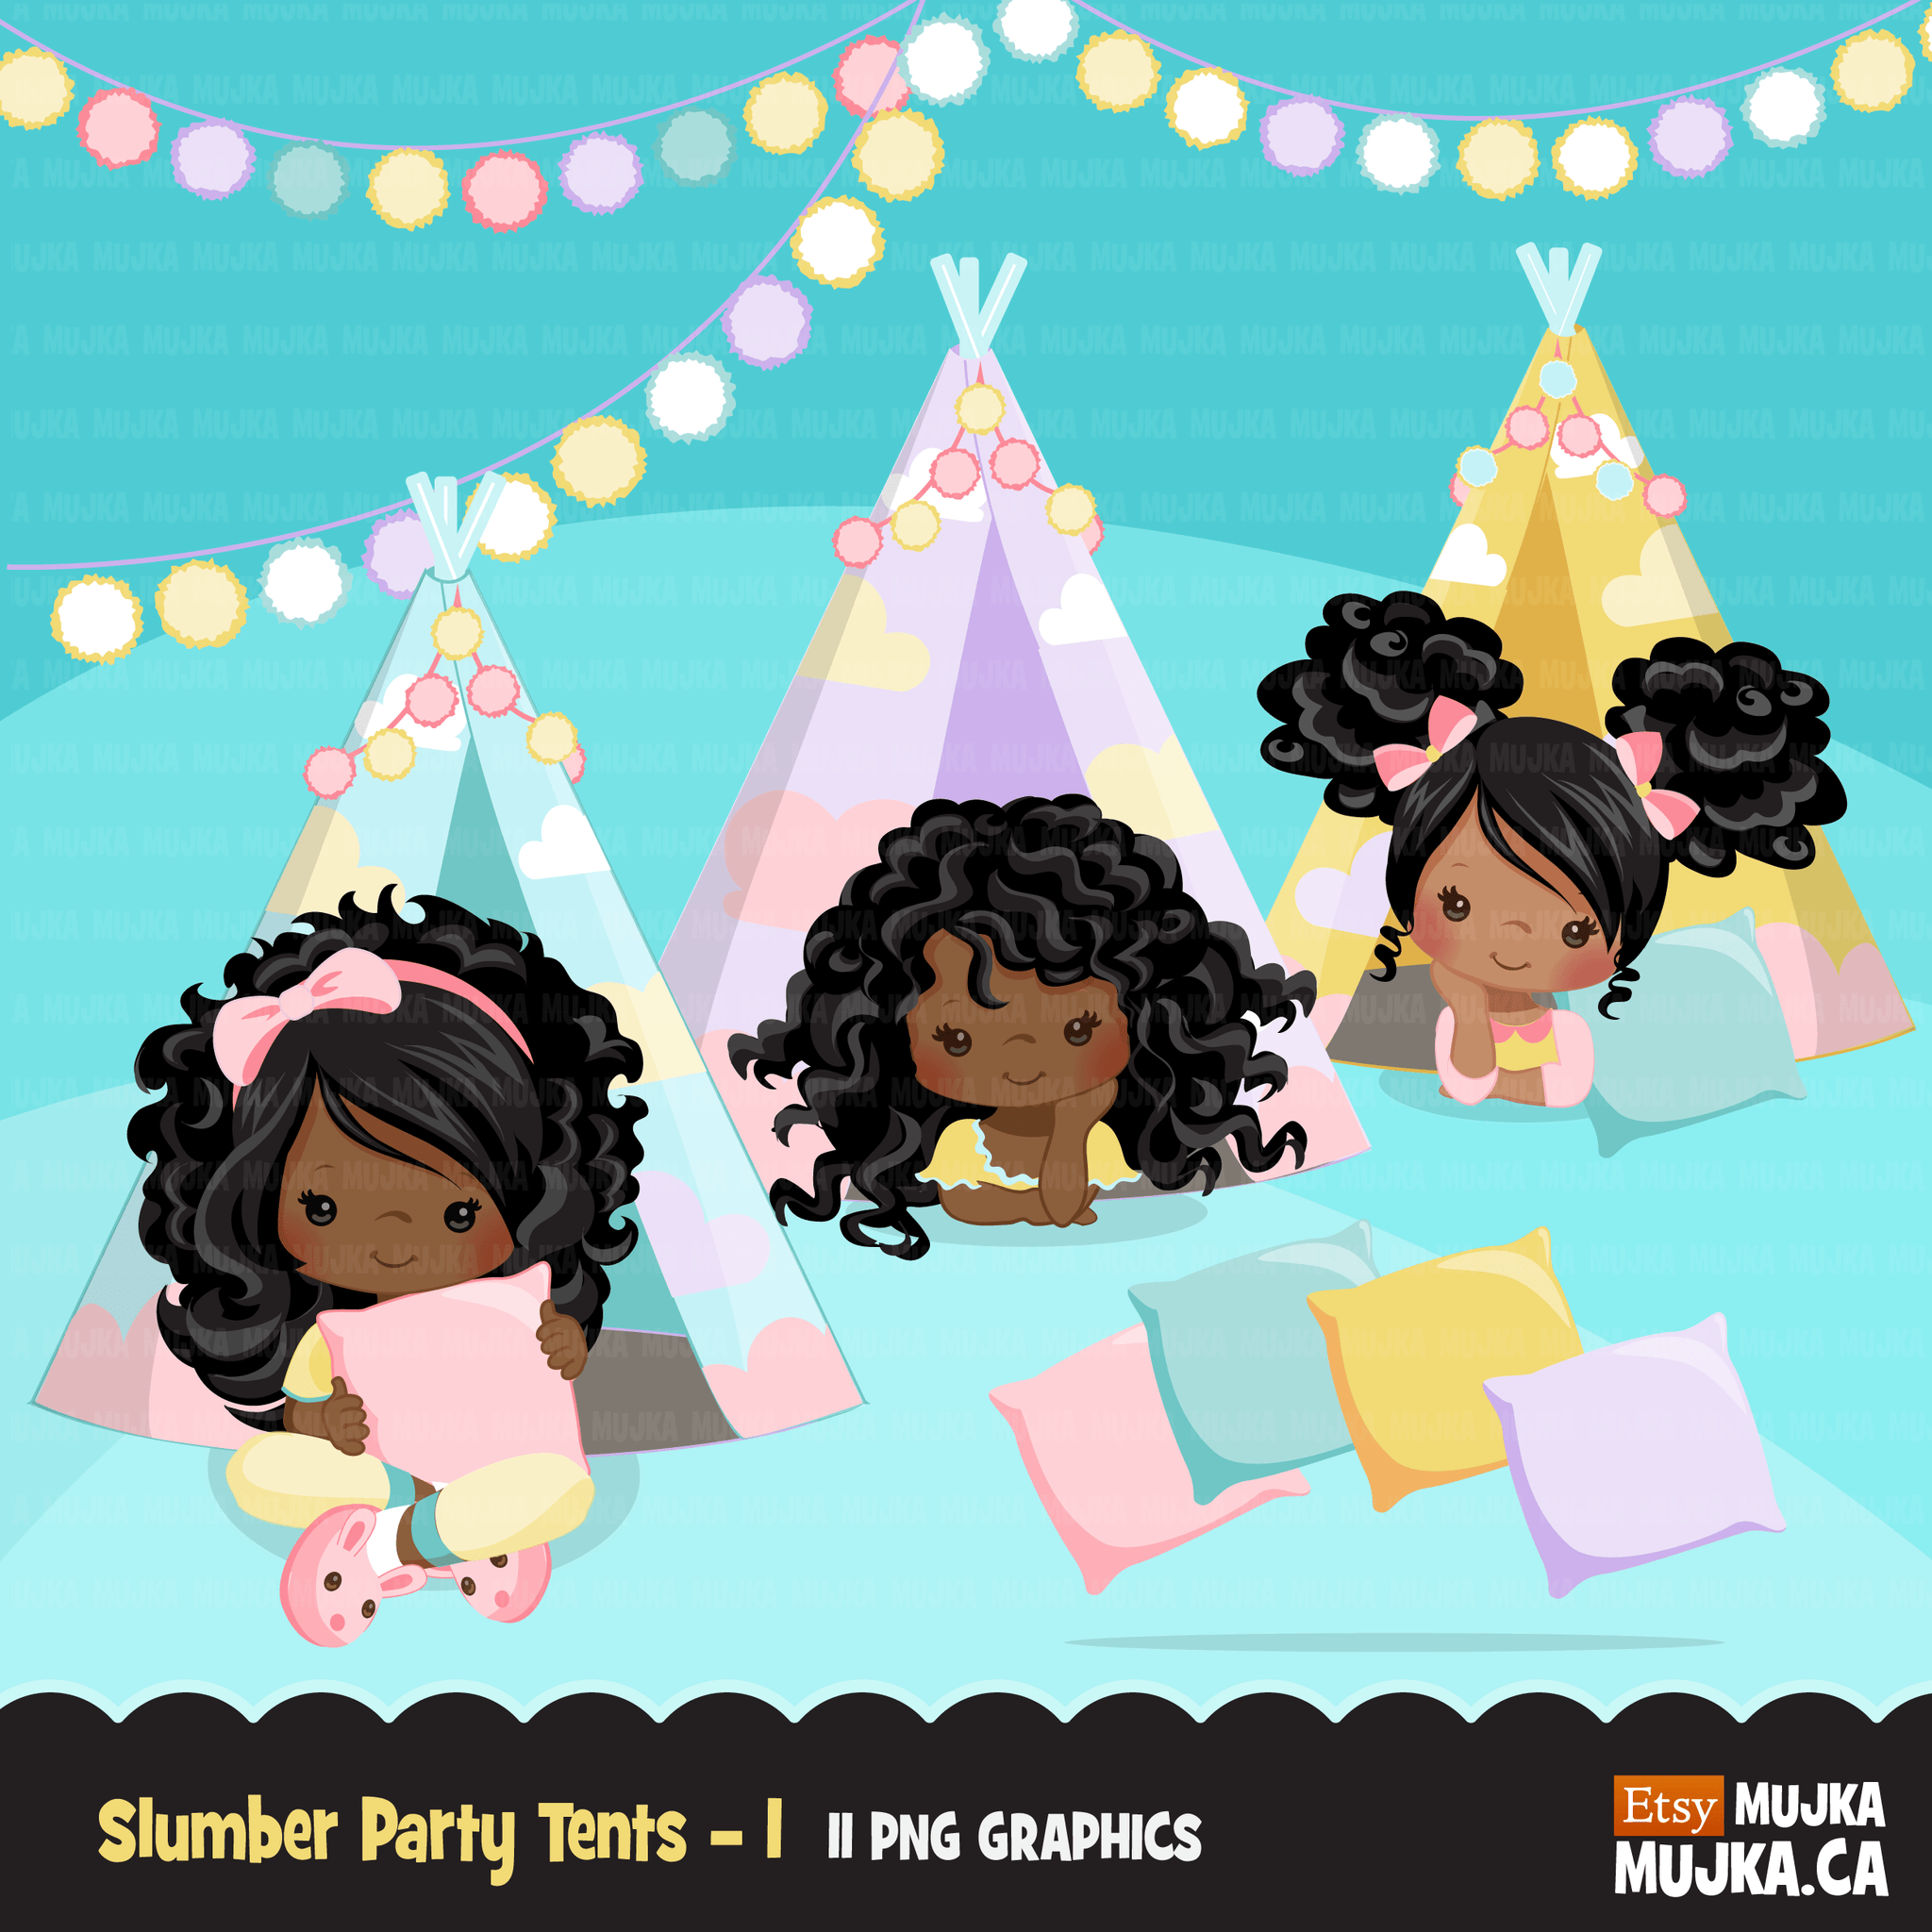 Slumber Party tents Clipart Bundle. Boys and girls sleepover graphics.